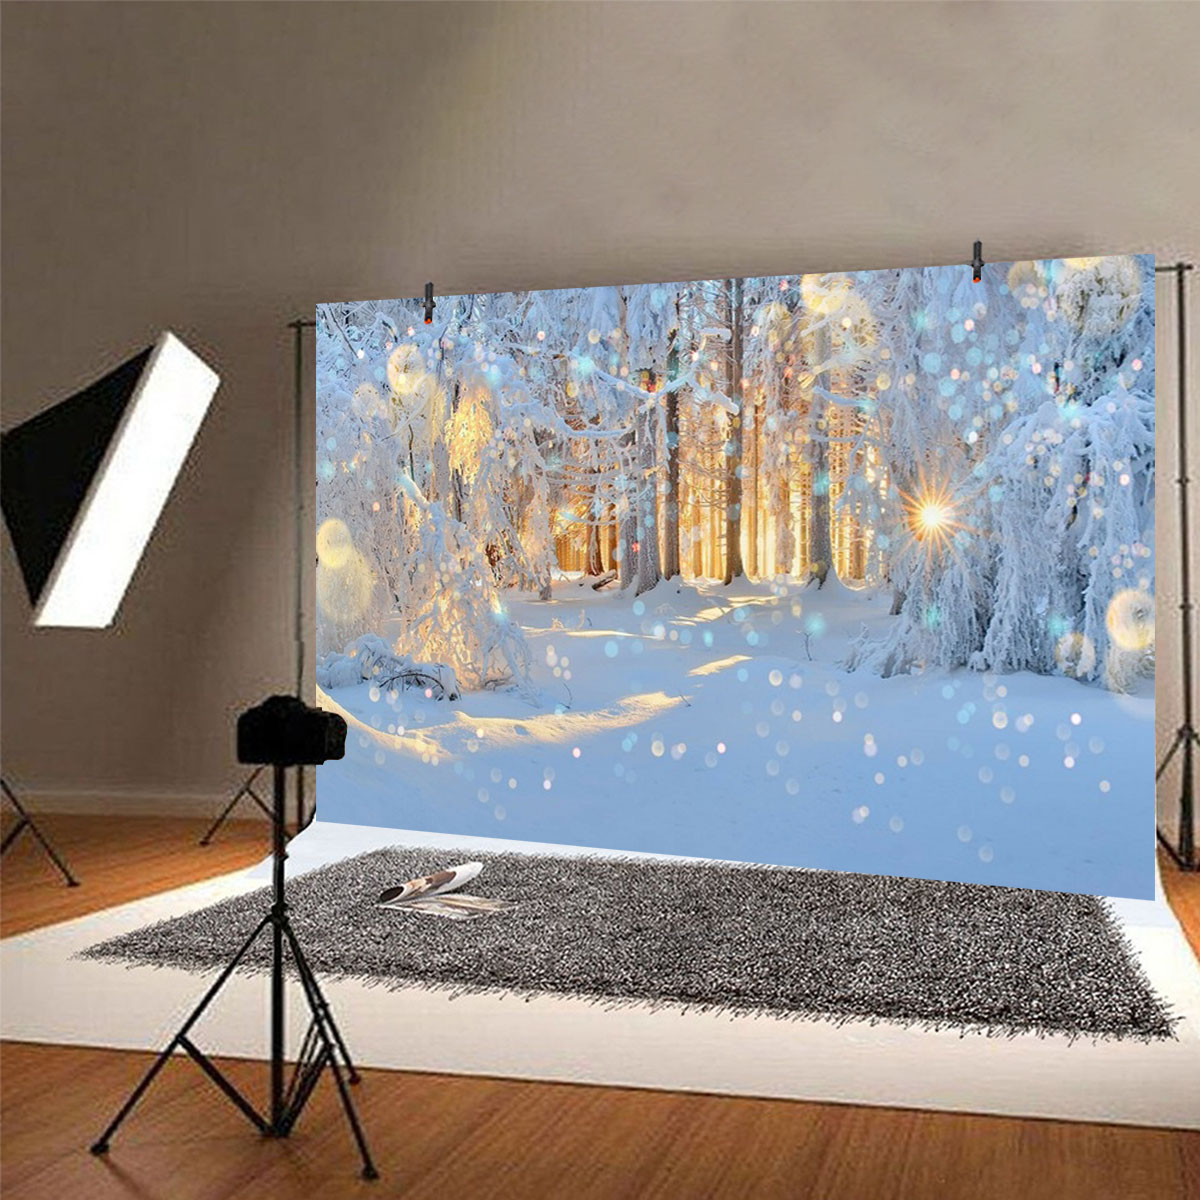 5x3FT-7x5FT-8x6FT-Winter-Snow-Light-Forest-Photography-Backdrop-Background-Studio-Prop-1609473-3